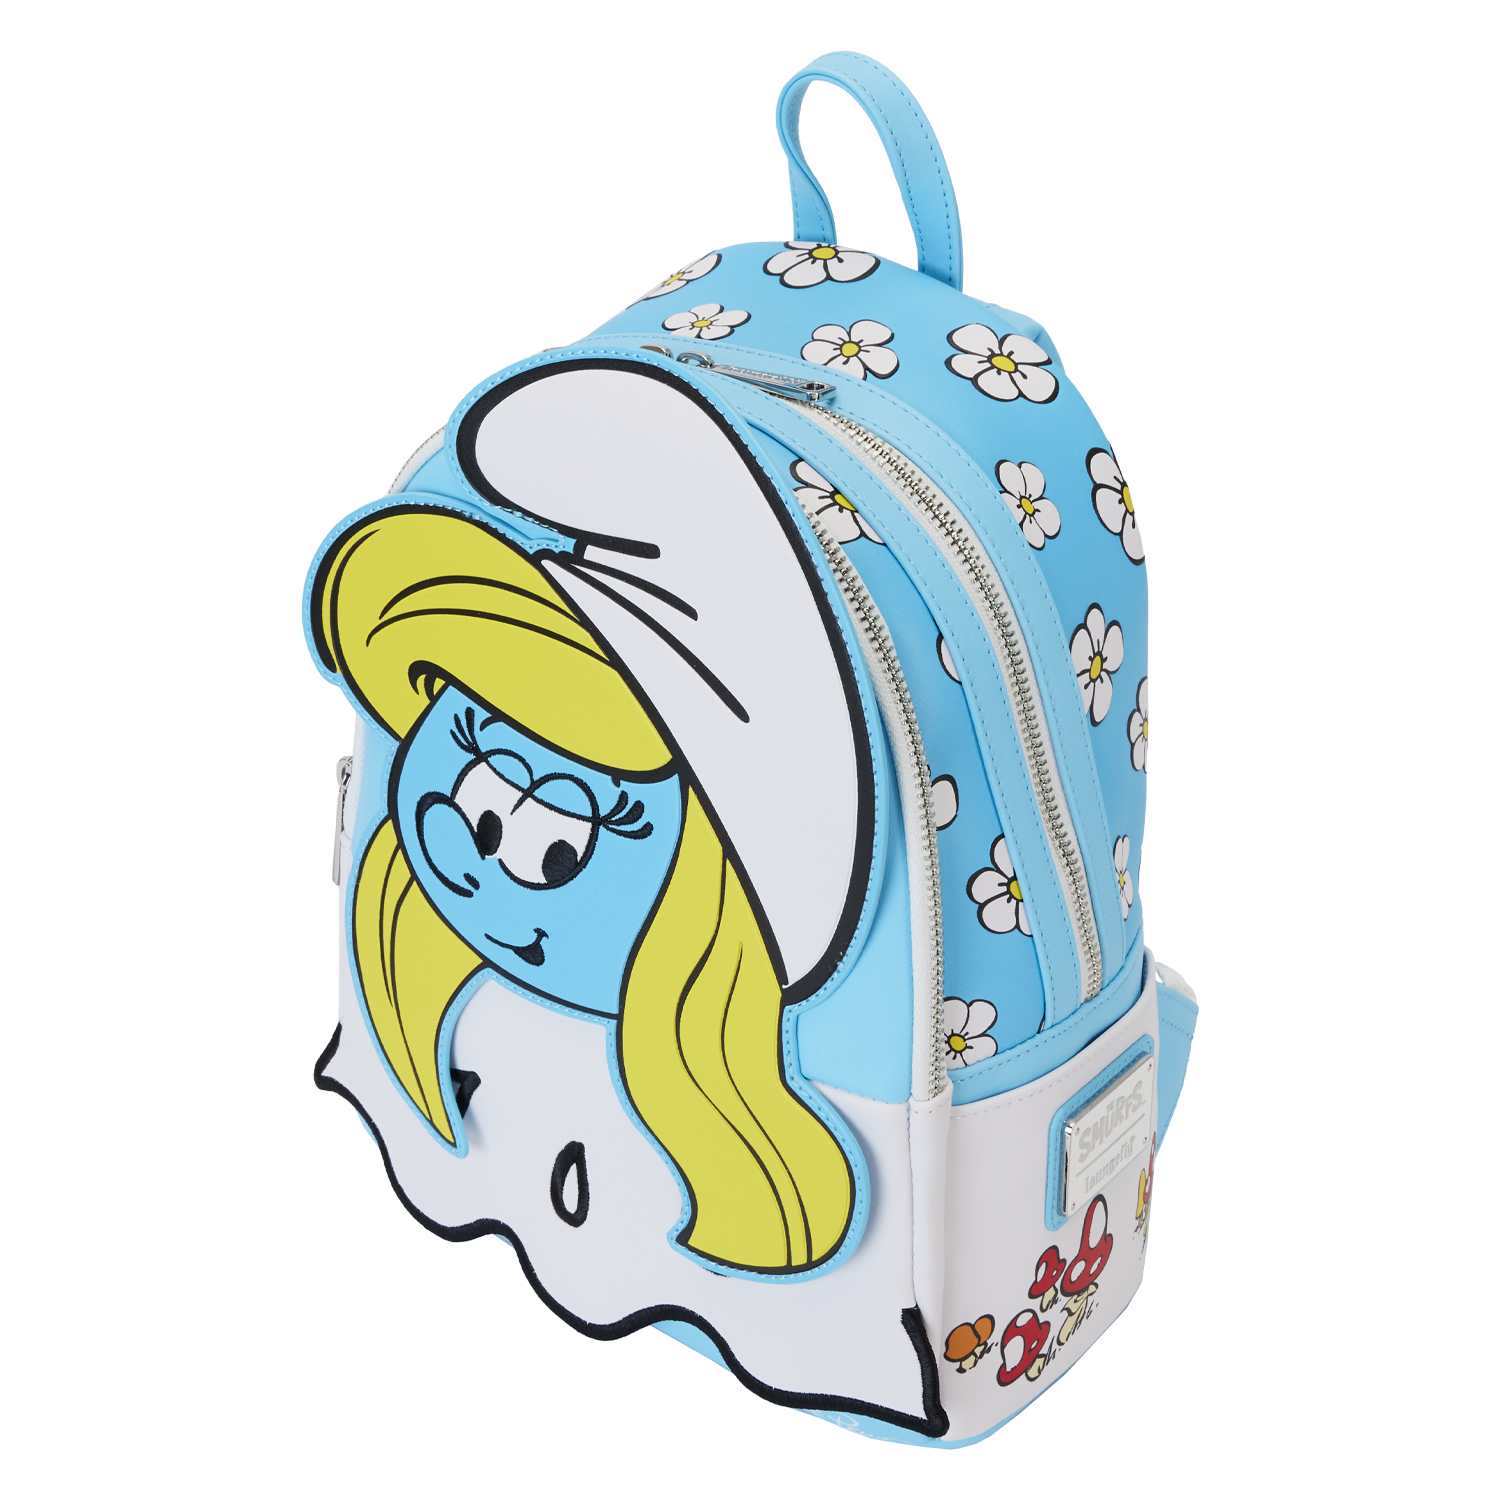 Loungefly Smurfs - Smurfette Cosplay Mini Backpack